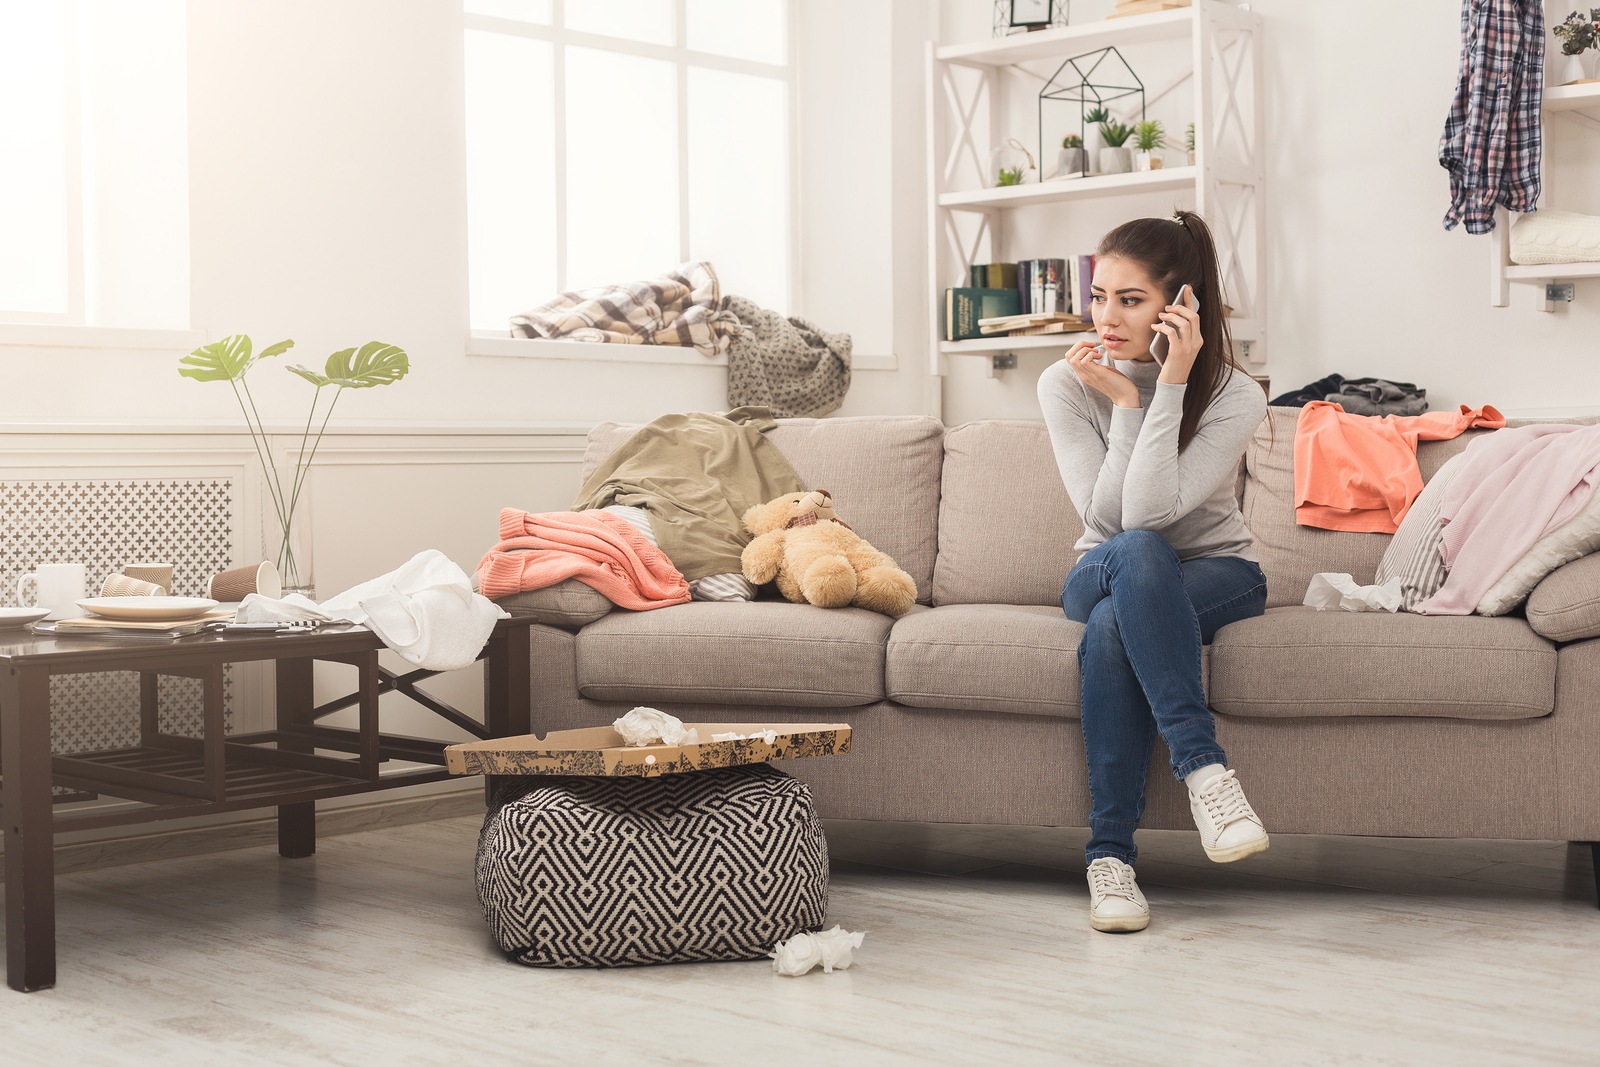 Desperate helpless woman sitting on sofa in messy living room. and talking on mobile, surrounded by many stack of clothes. Disorder and mess at home, copy space